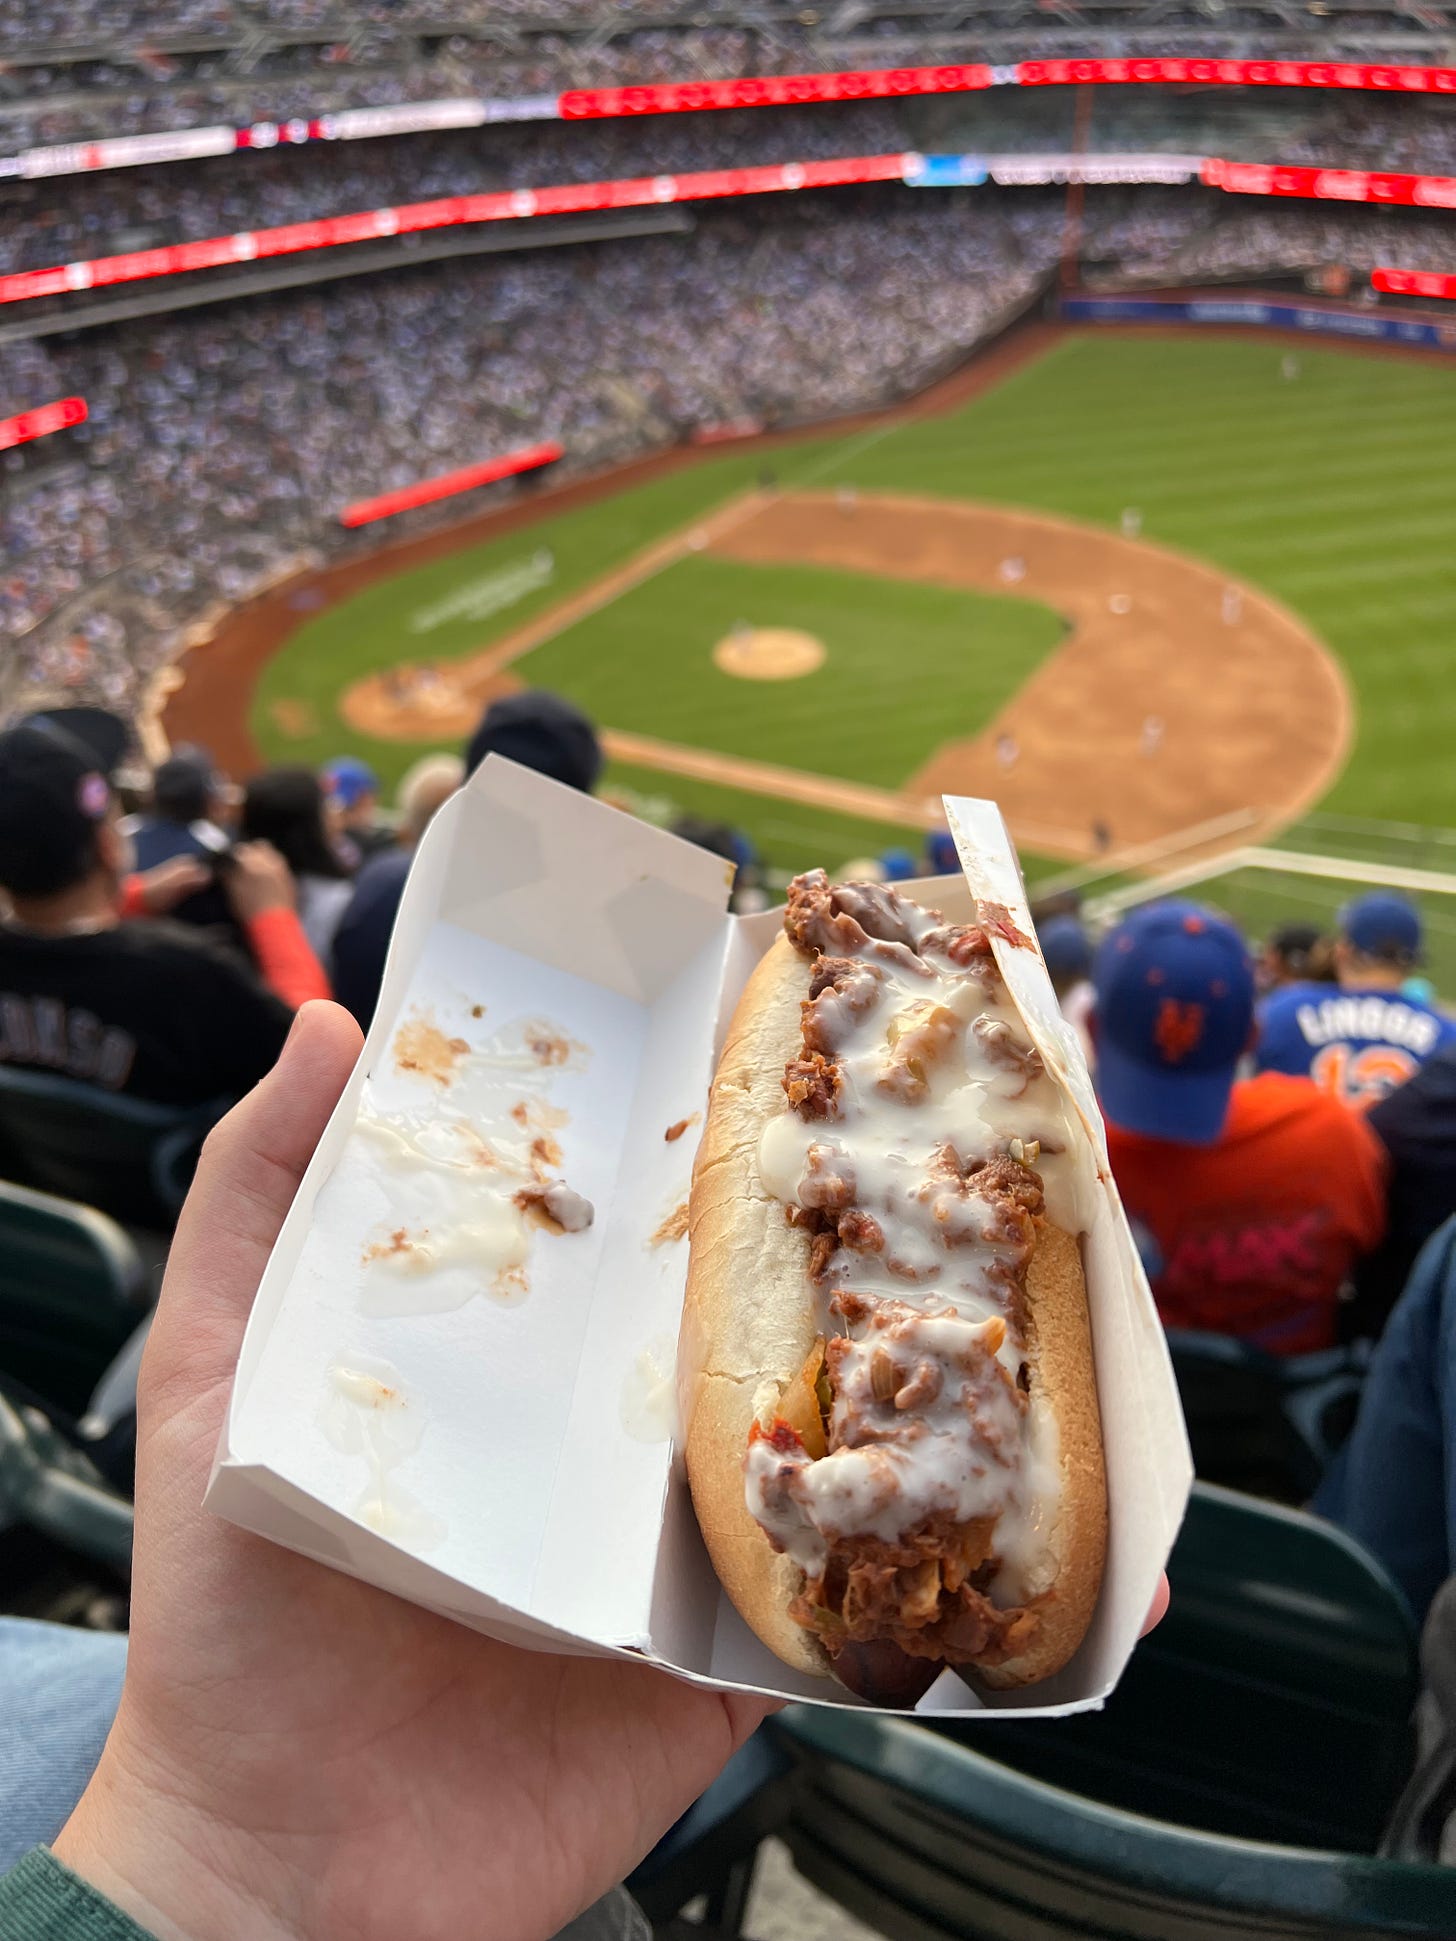 A Vegan City dog slathered in cheese sauce, blurred baseball game in background.